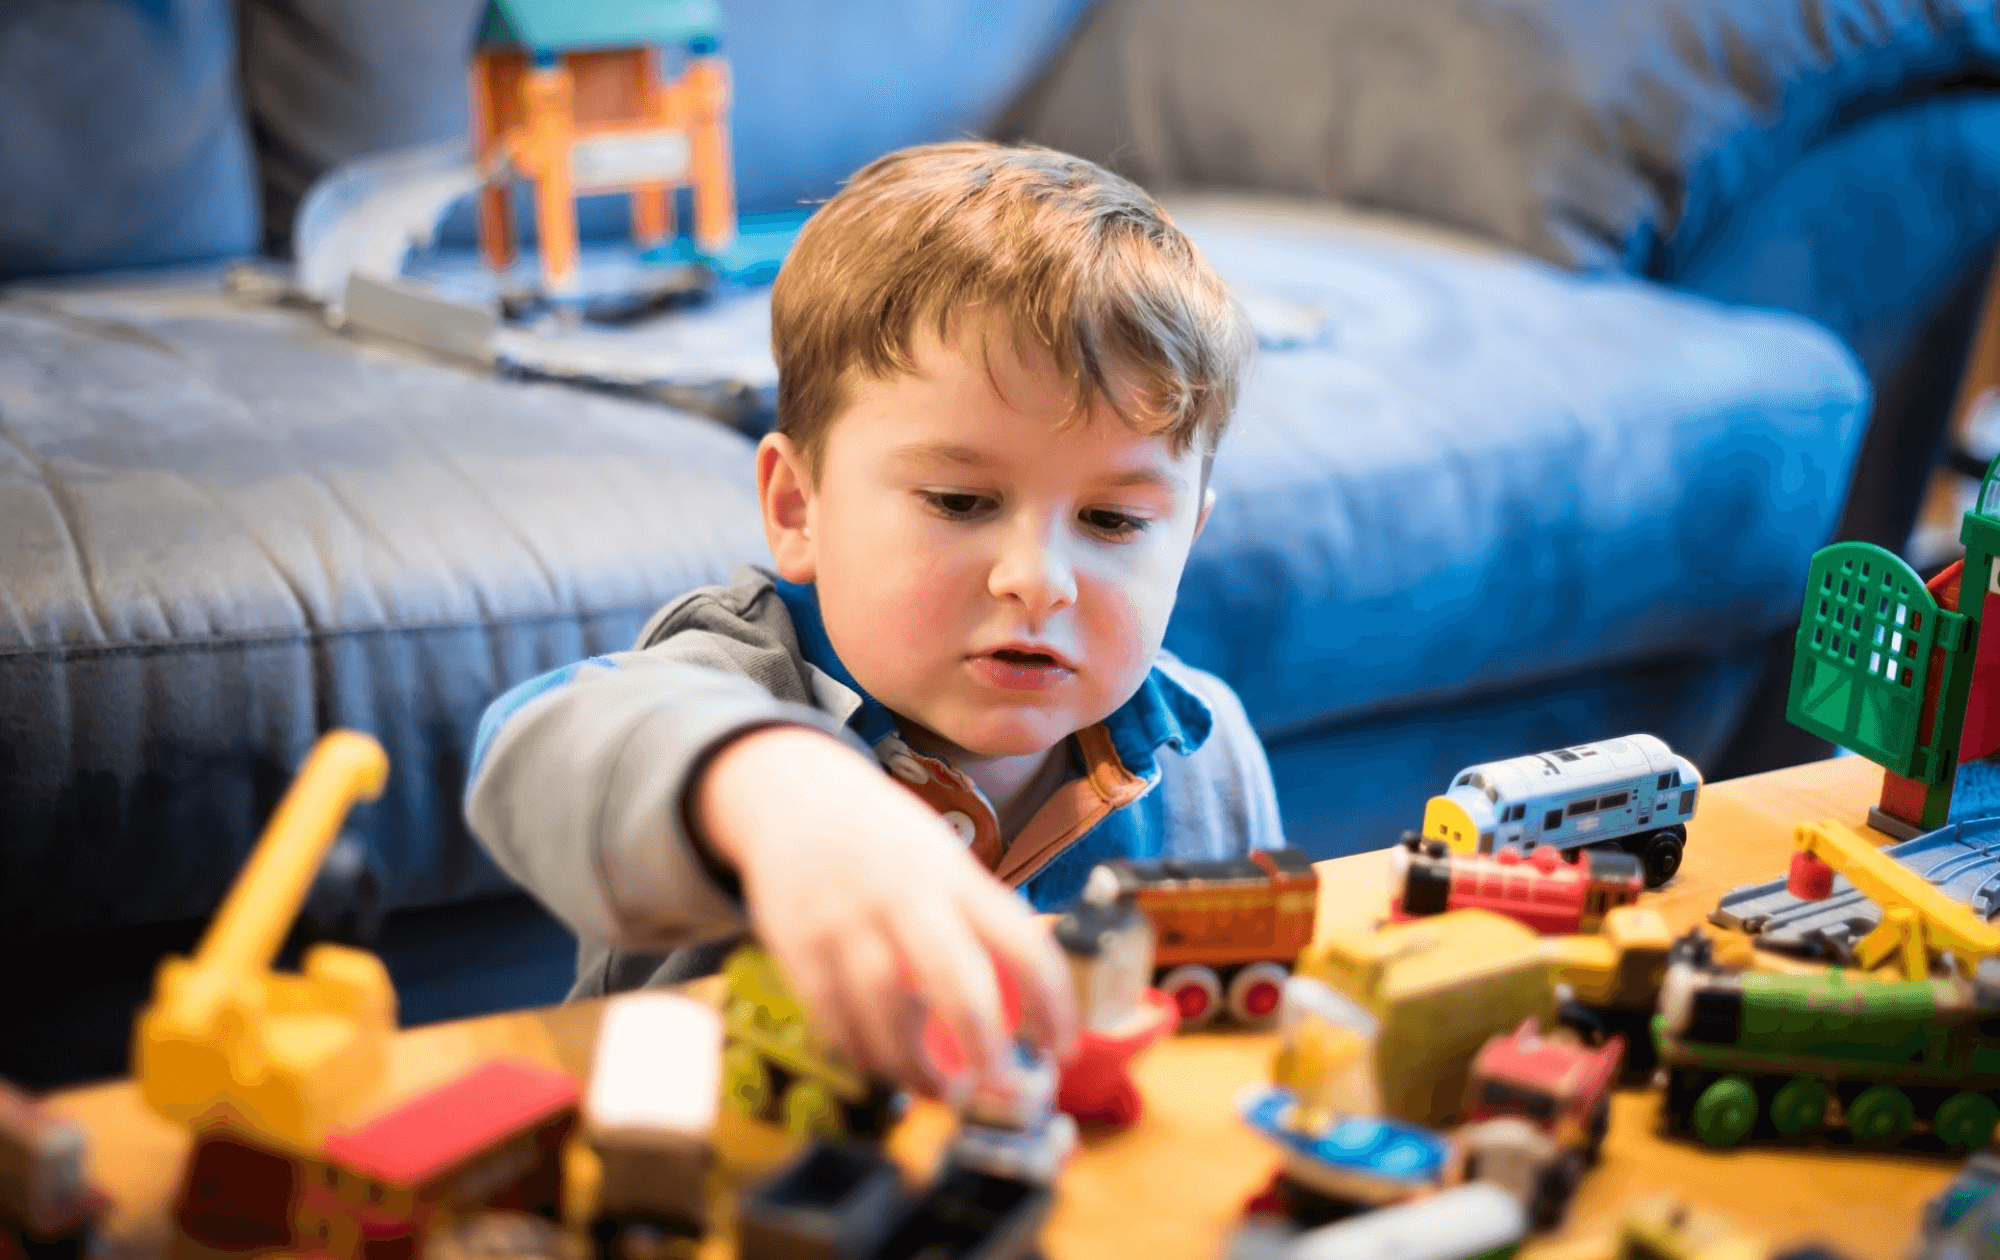 Play helps a child's cognitive development